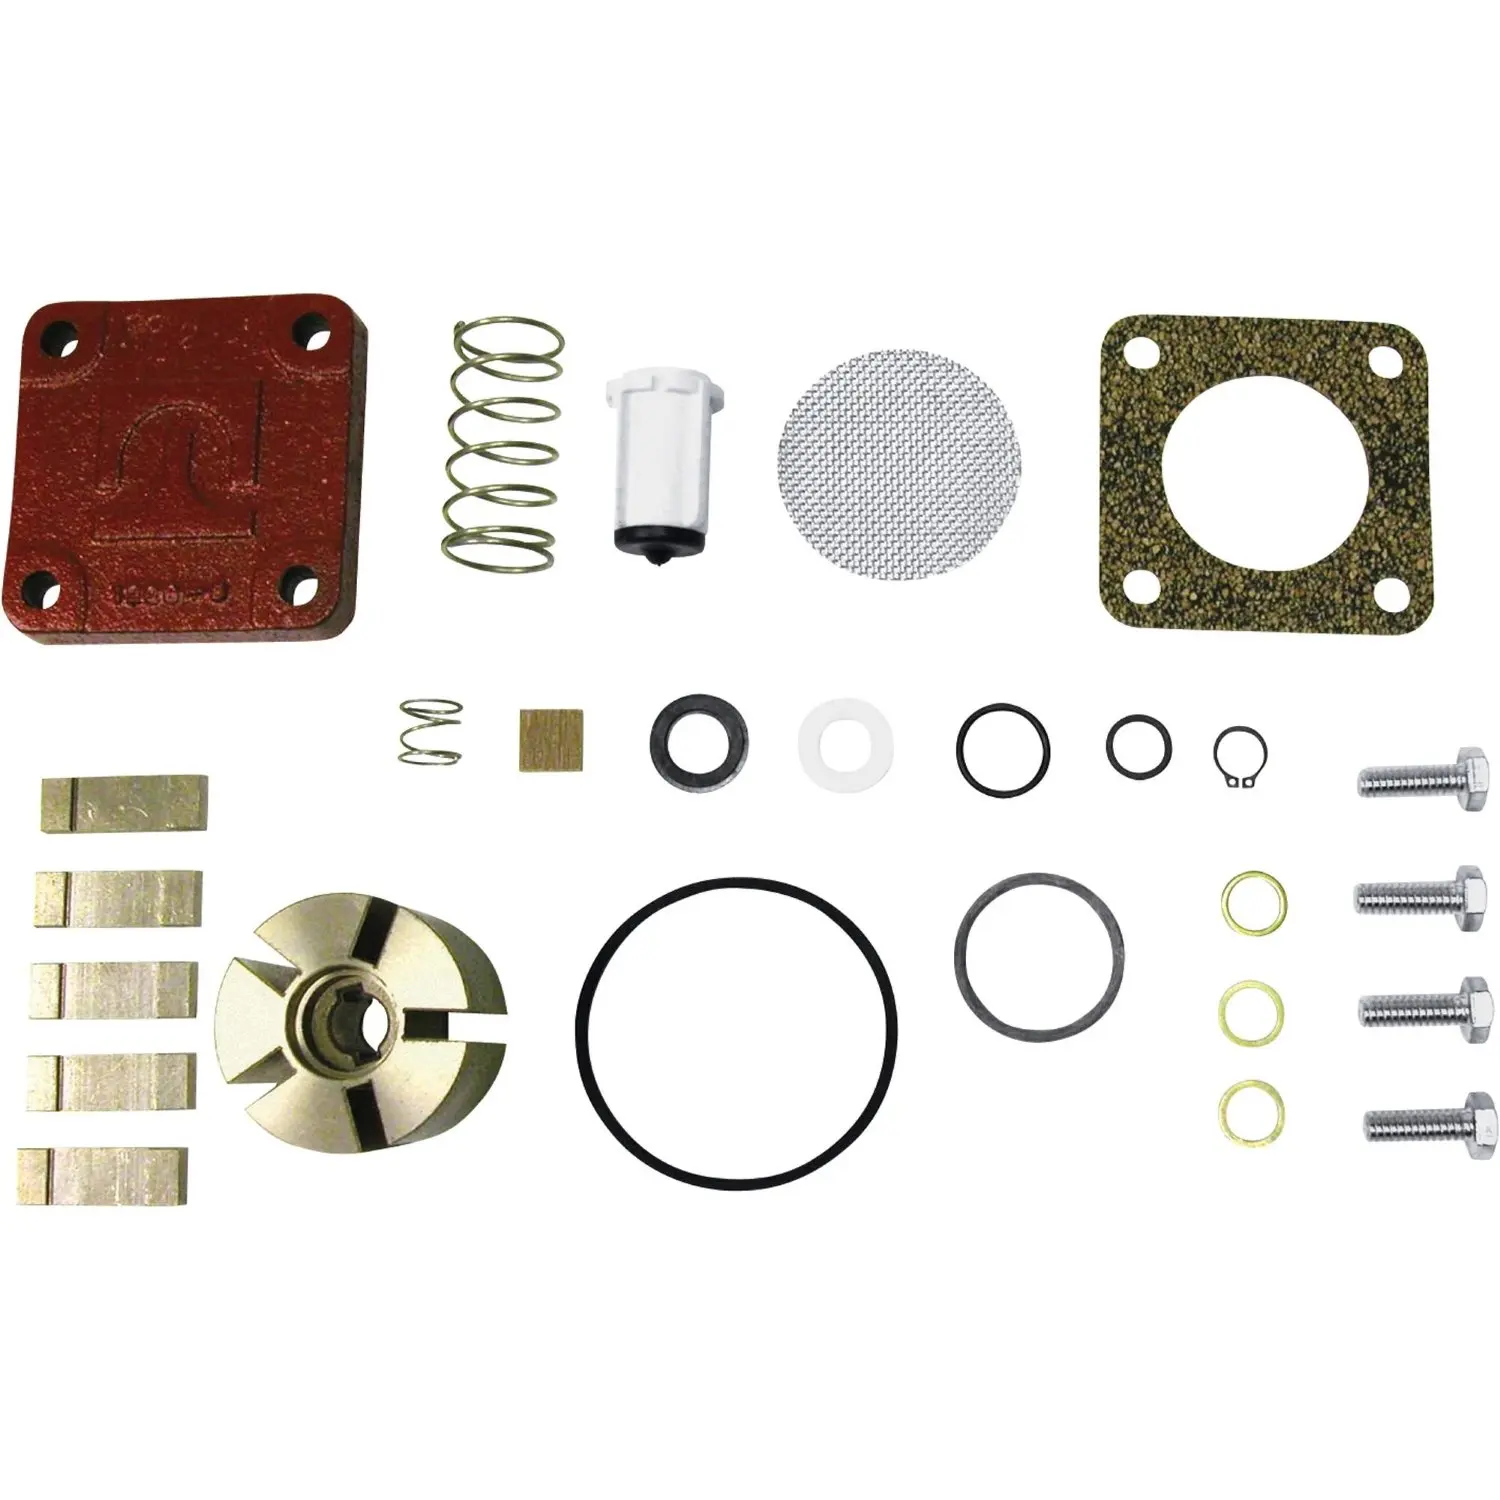 

Rebuild Kit for 600, 1200, 2400, 4200, and 4400 Series with Rotor Cover